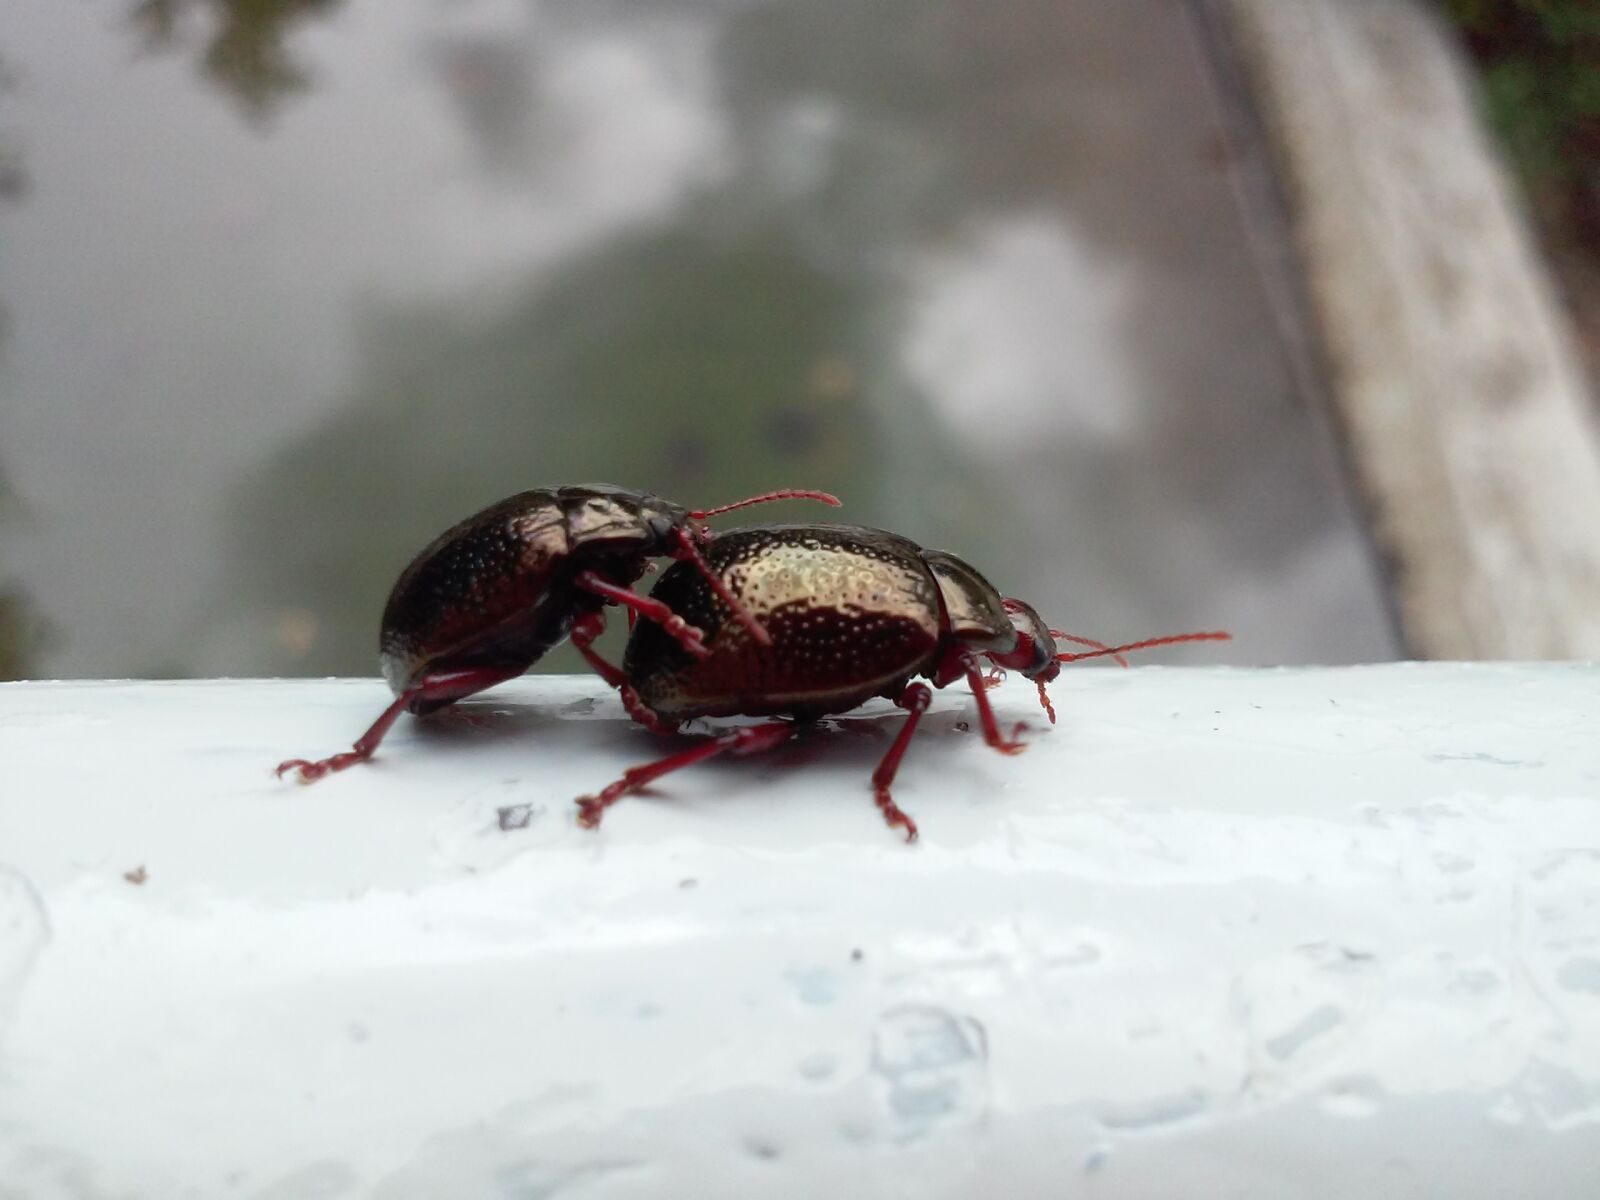 LG L65 sample photo. Insect, beetle, black beetle photography